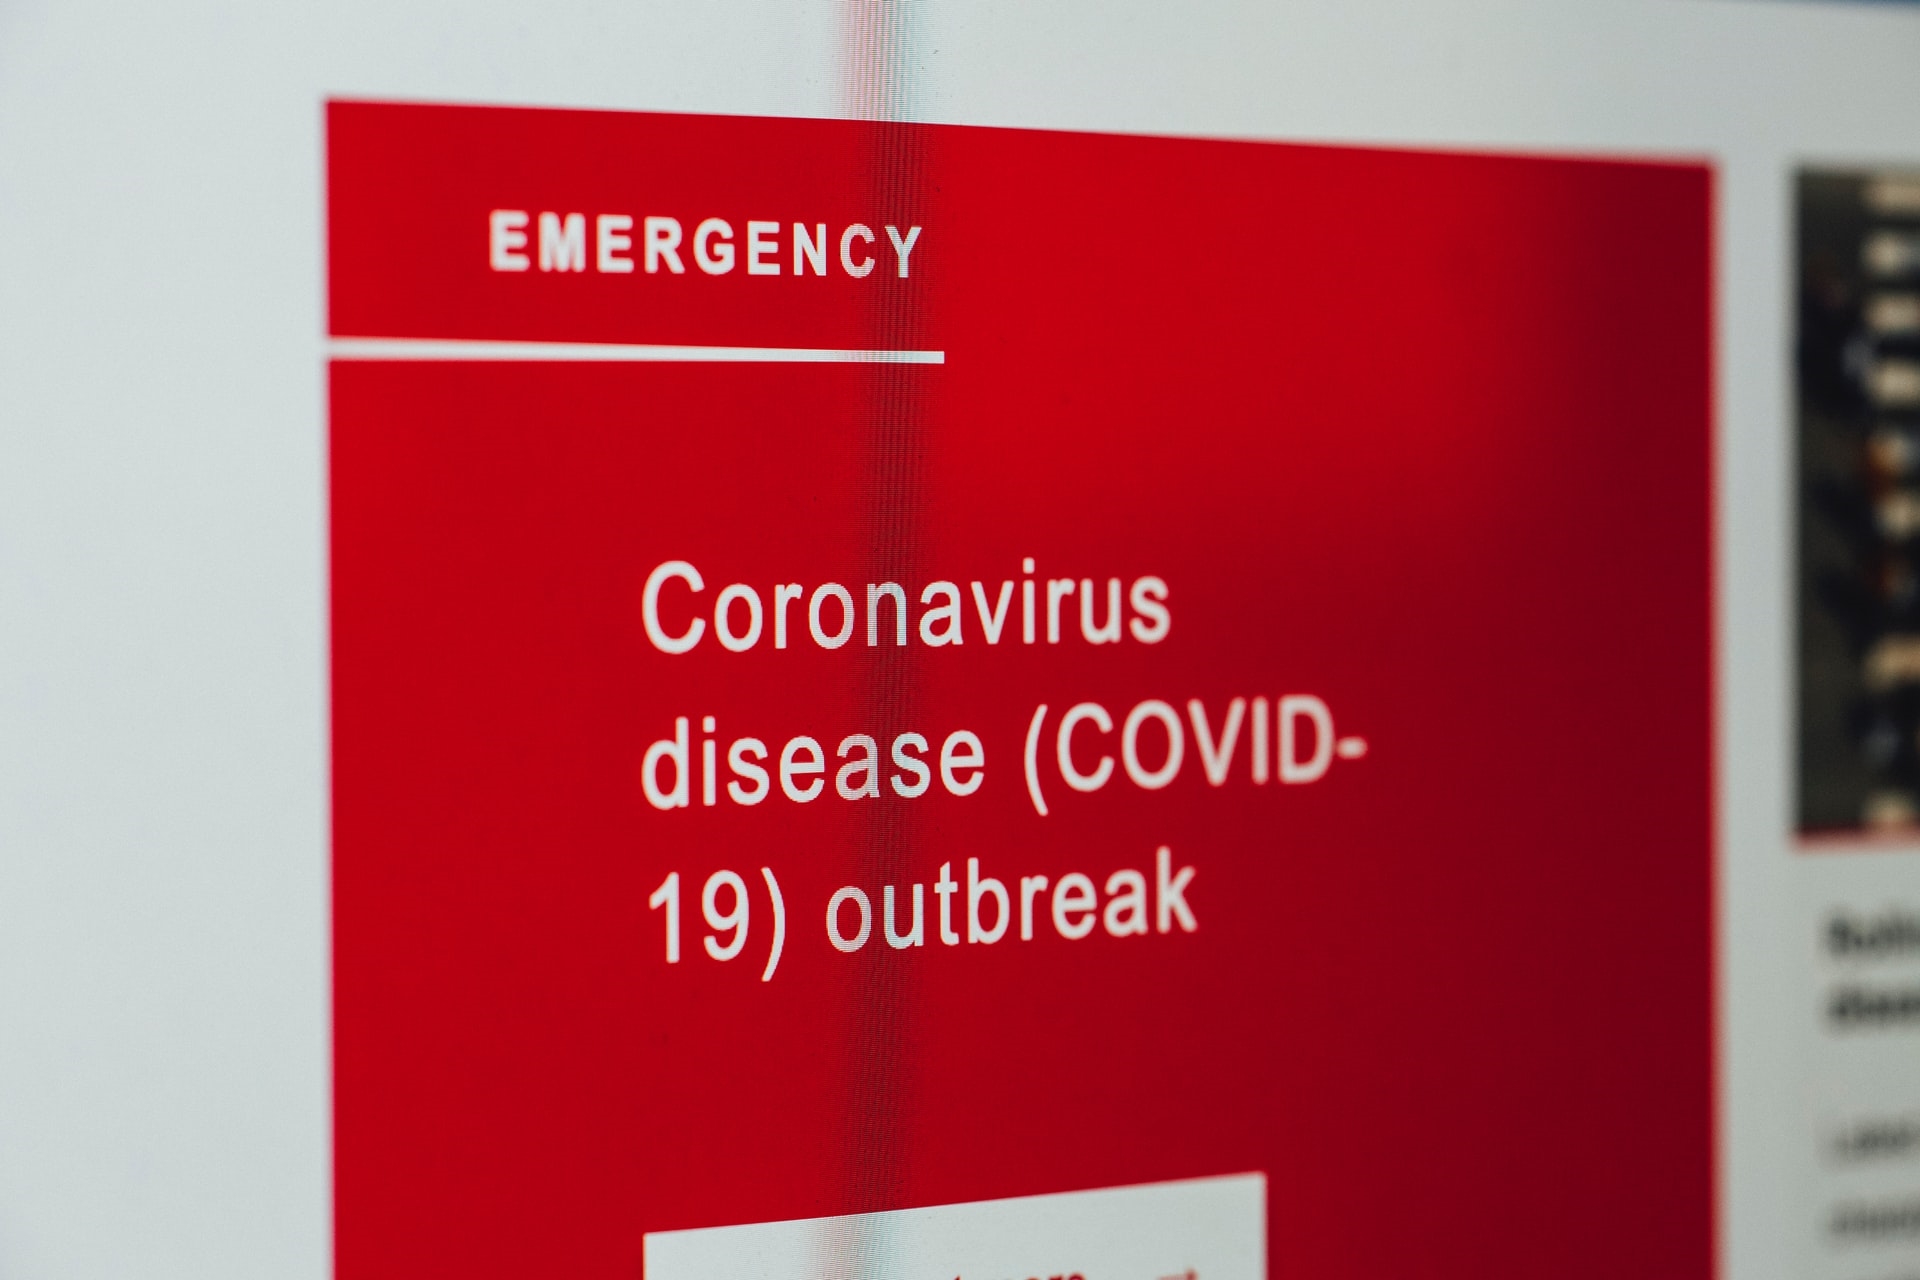 The importance of remote learning during the current Coronavirus Pandemic